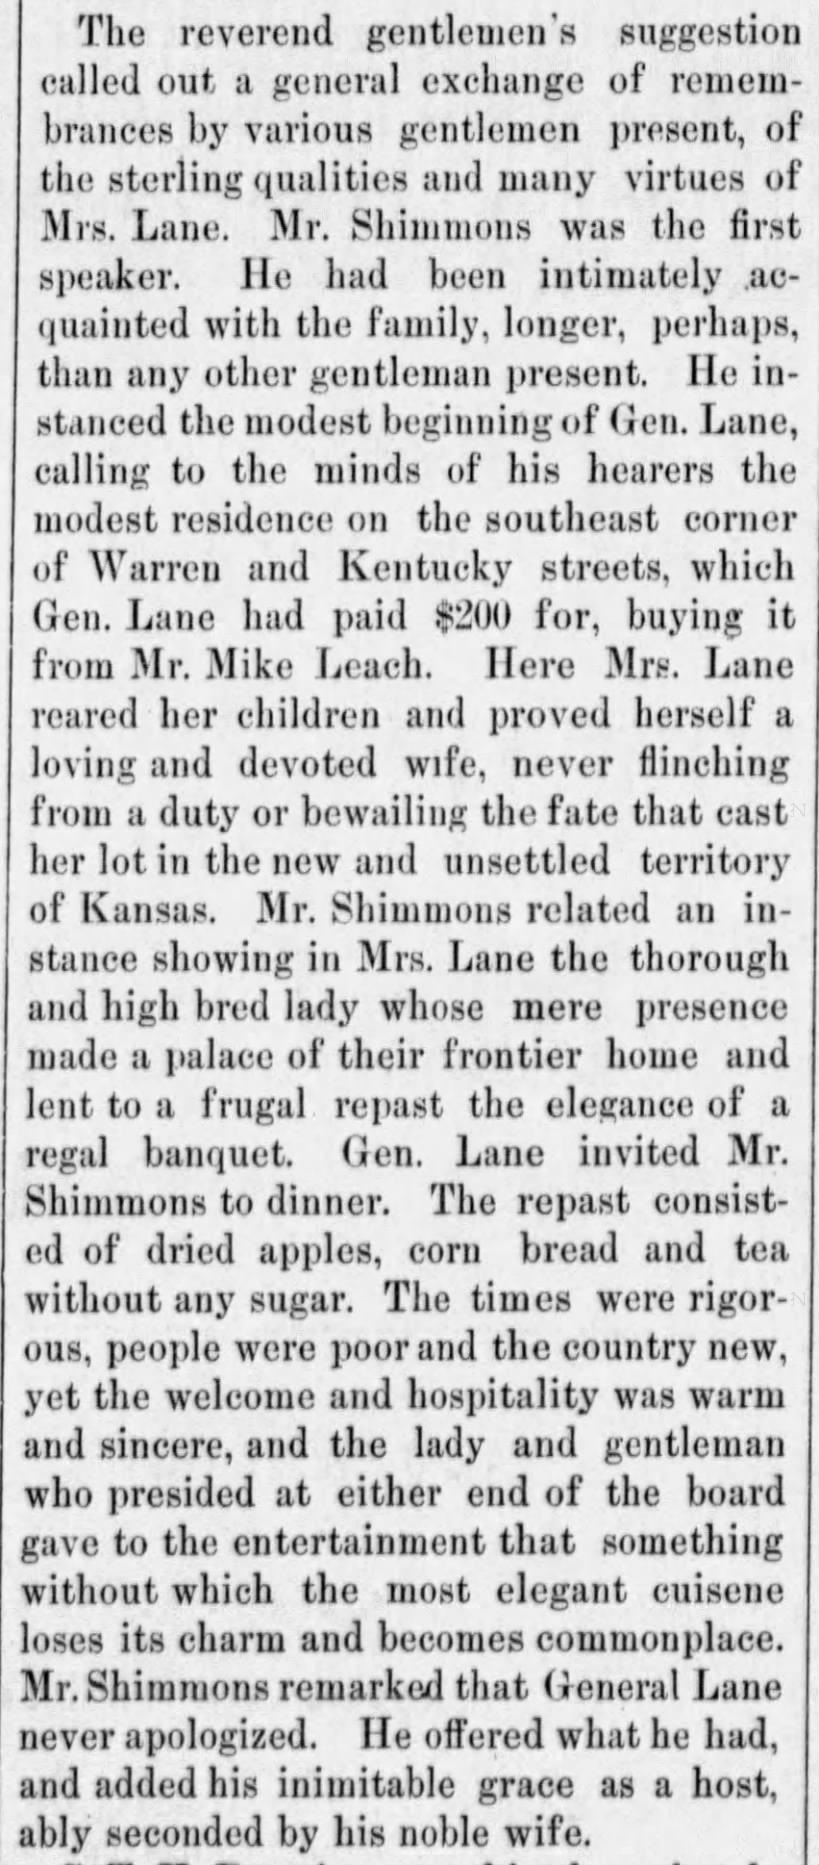 J.H. Shimmon's eulogy at the funeral for Mrs. Lane (wife of General Lane)